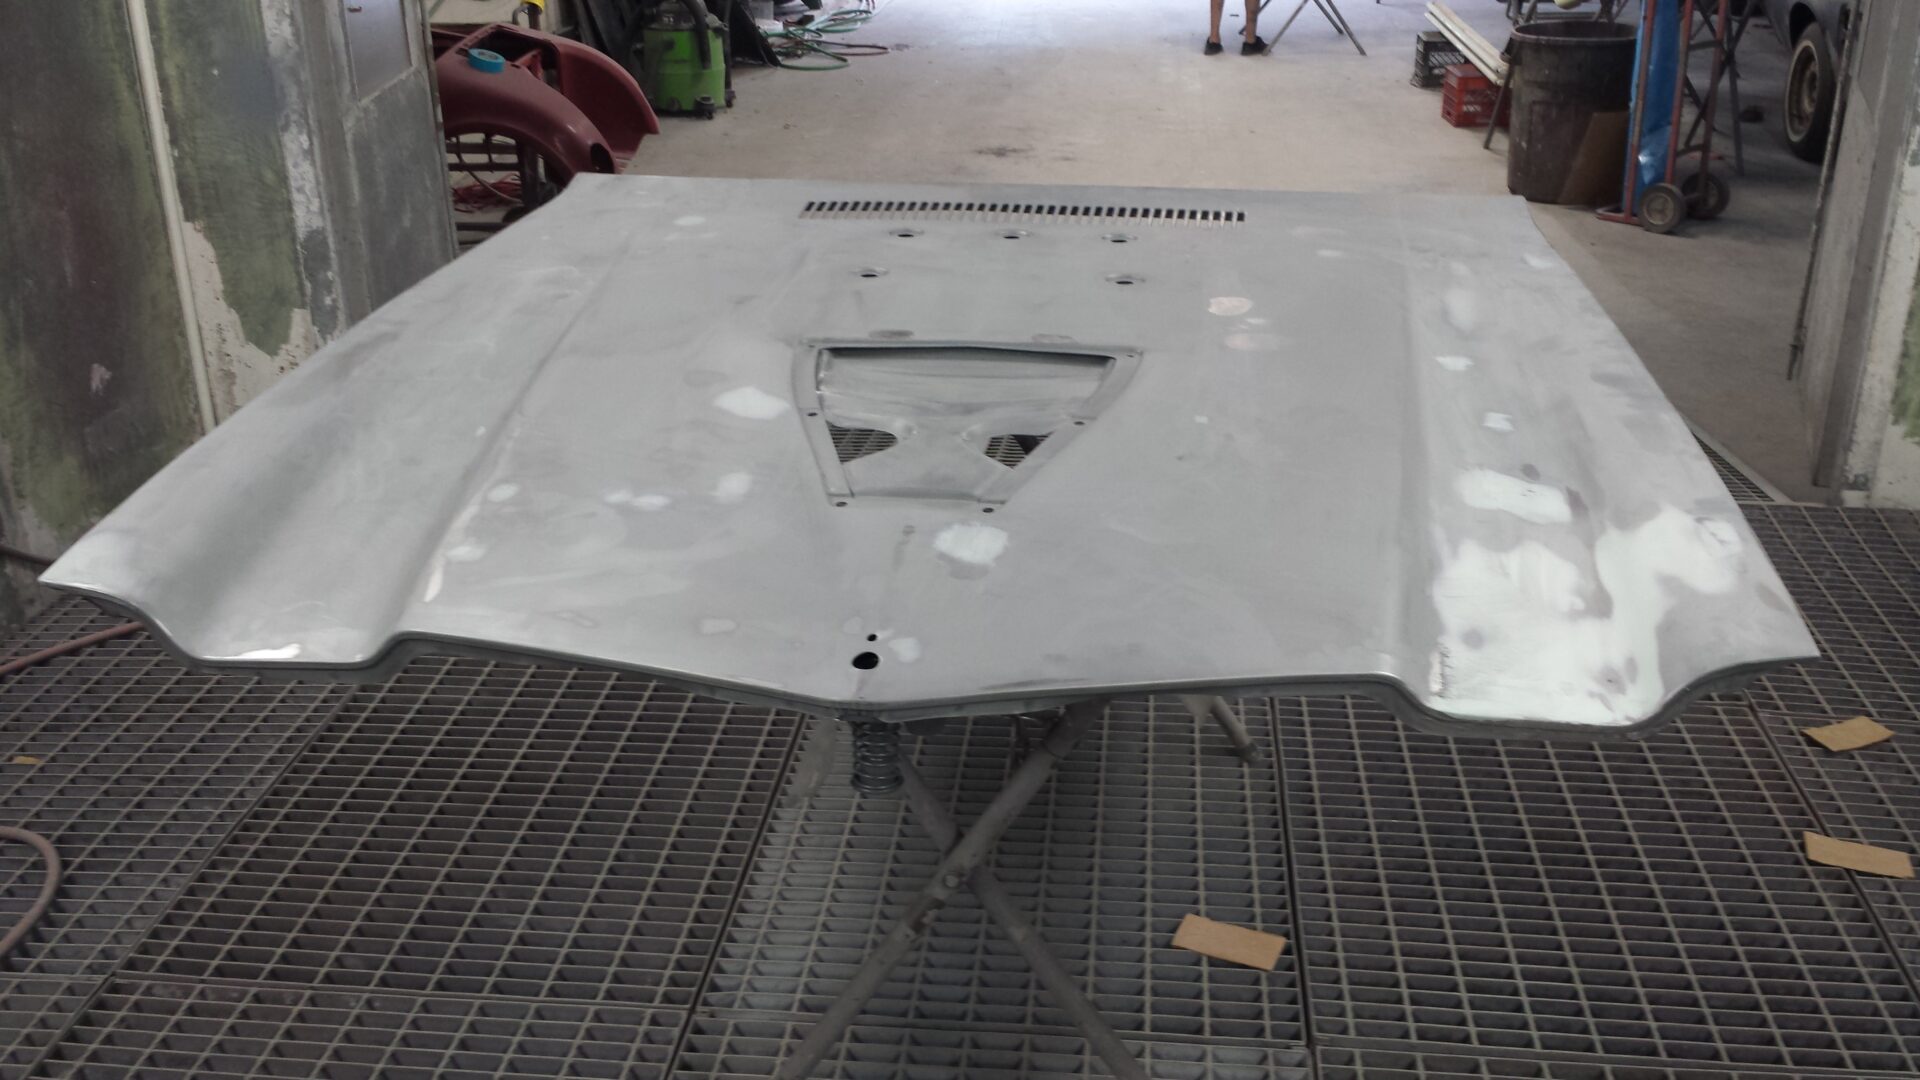 The 1978 Chevy Camaro Z28 hood to be restored